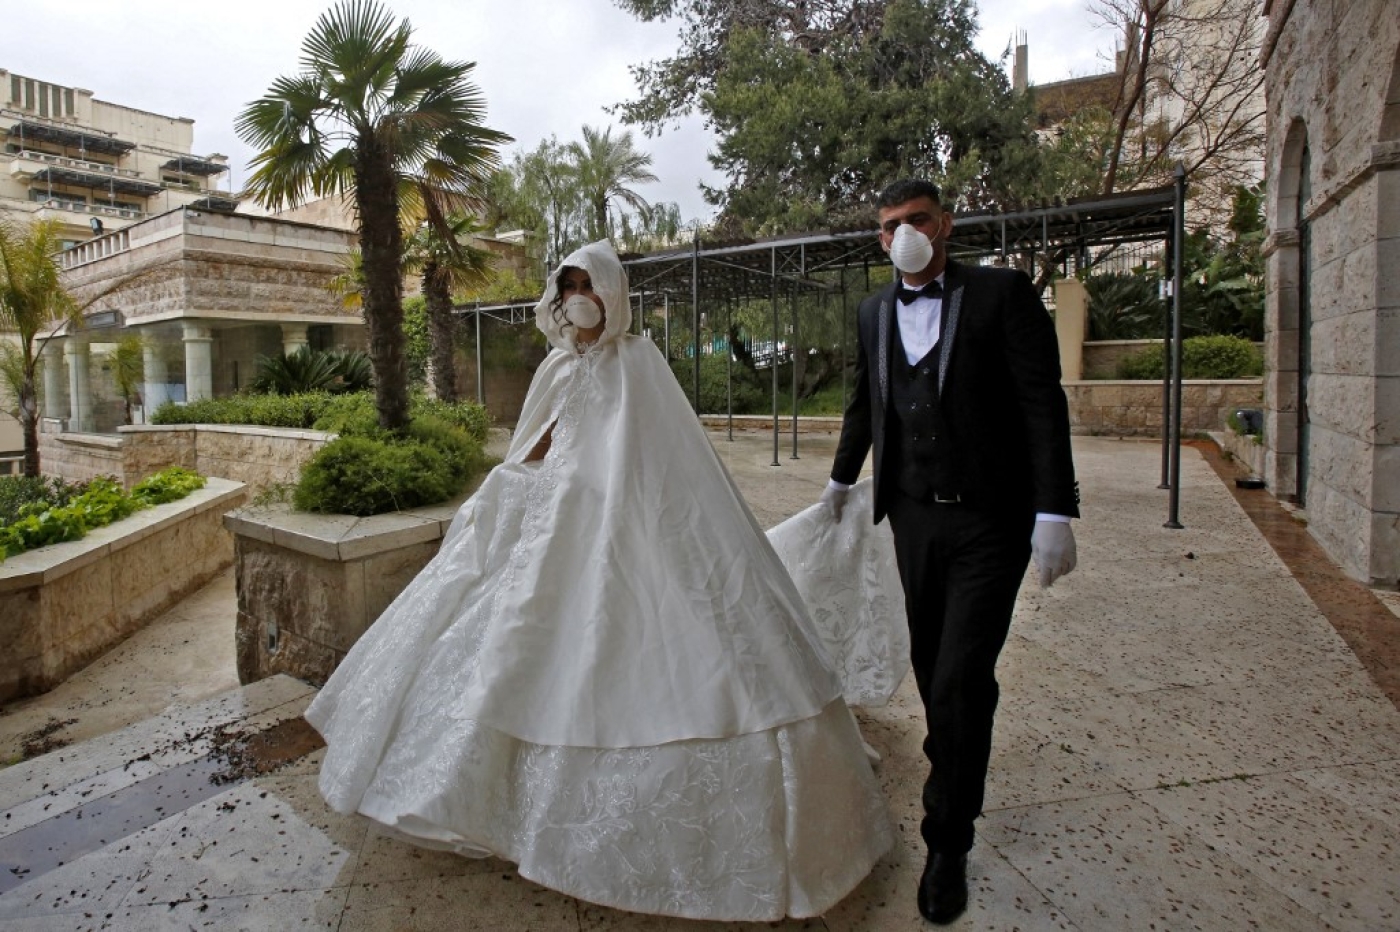 Newly-wed Palestinians head to have their pre-wedding photo shoot in the garden of a hotel in the city of Bethlehem in the occupied West Bank on 10 April 2020 (AFP)